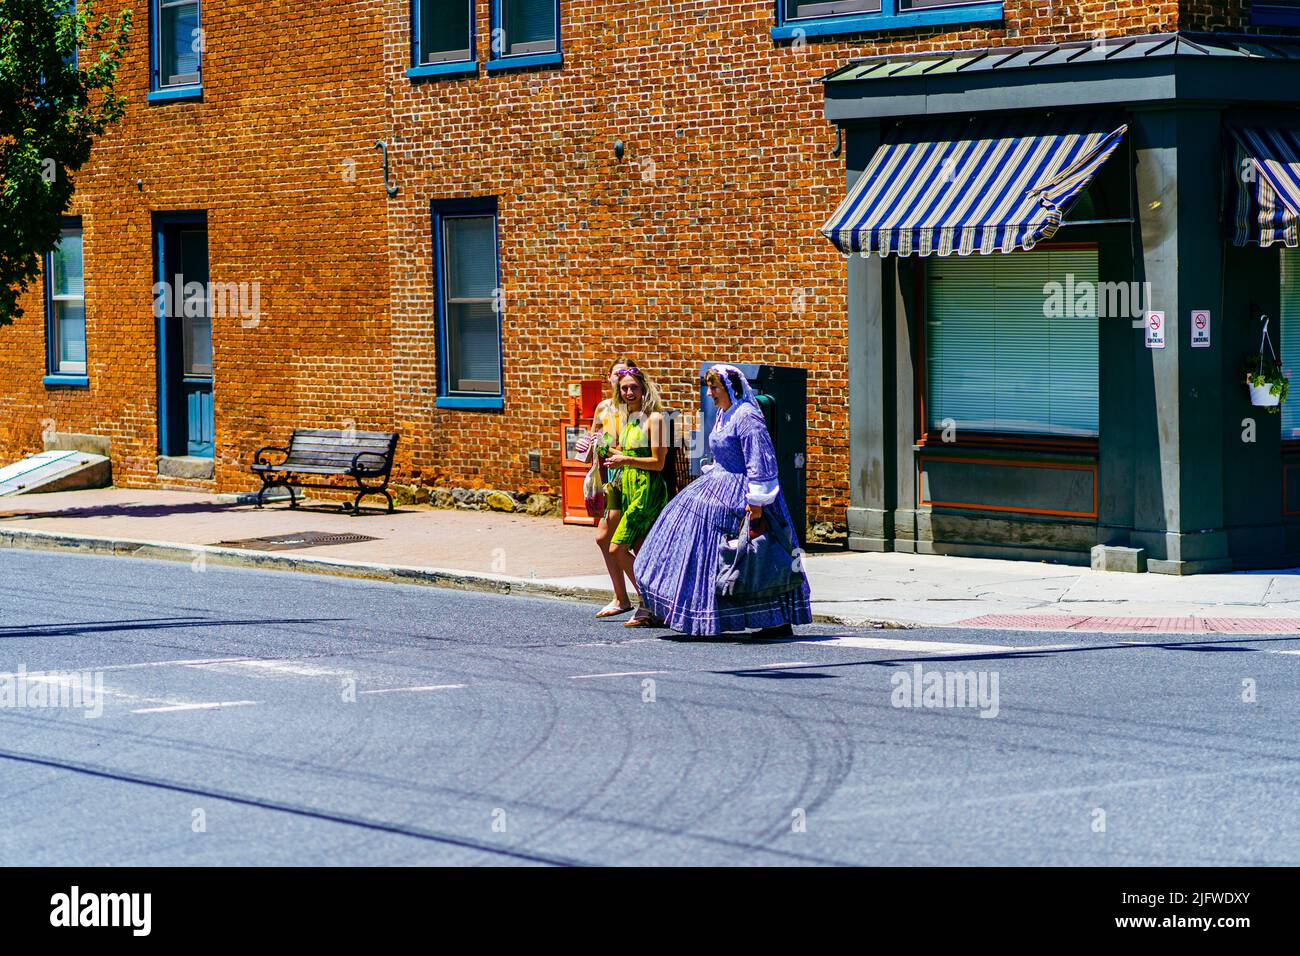 Gettysburg, PA, USA – July 3, 2022: A Civil War era reenactor walks on street in the historic town of Gettysburg wearing period over the July 4th cele Stock Photo